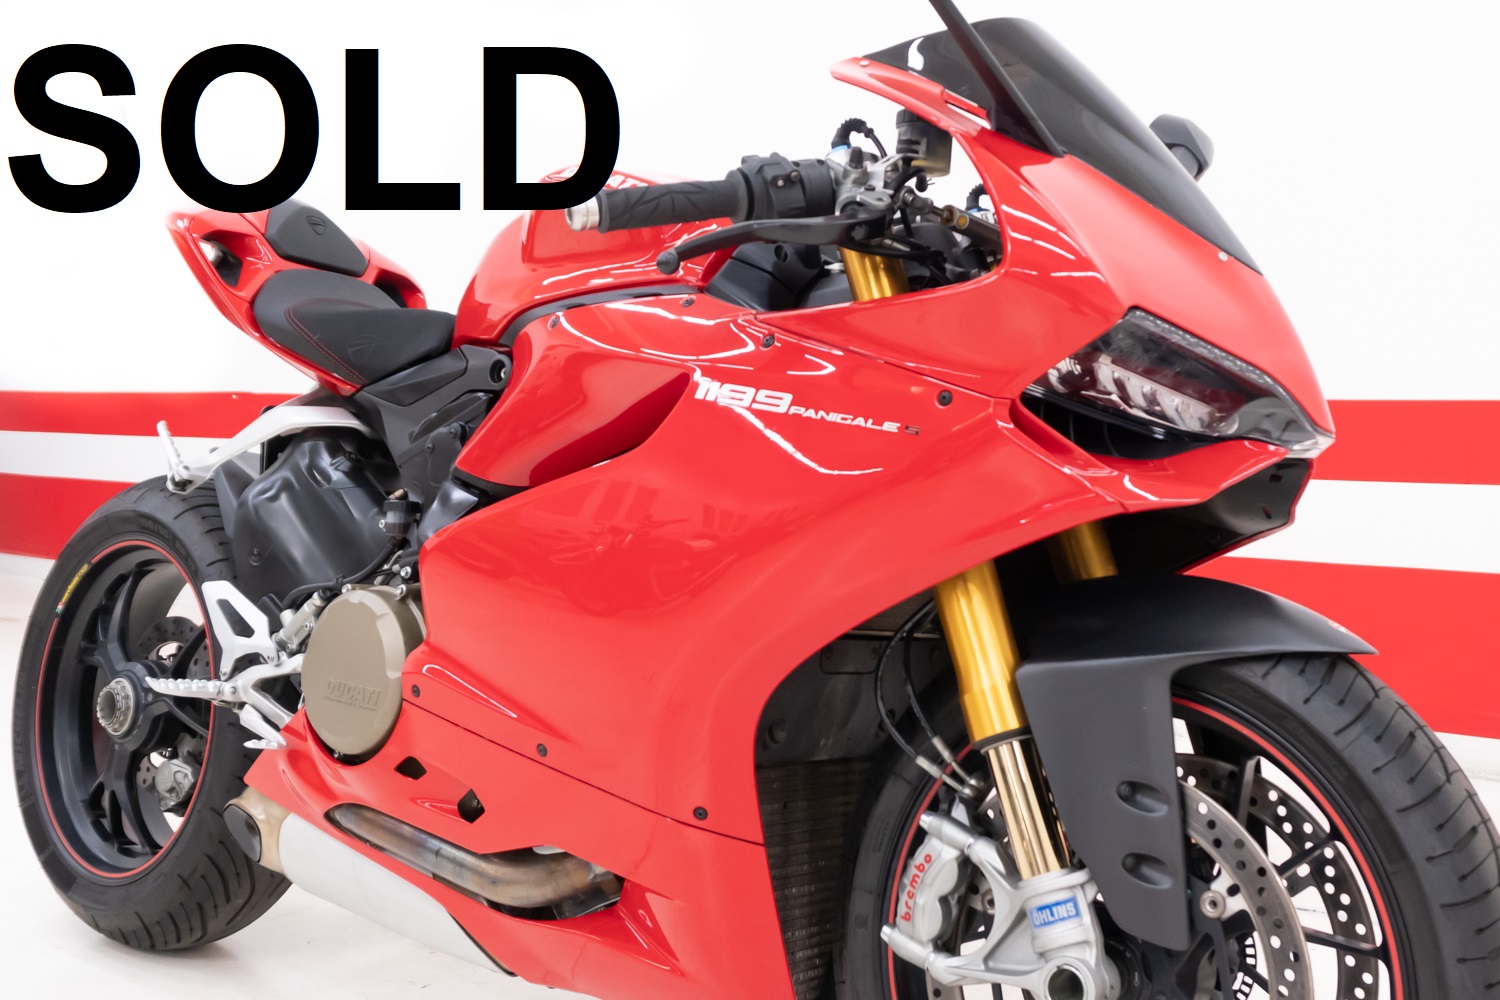 2014 Ducati 1199 Panigale S (ABS)